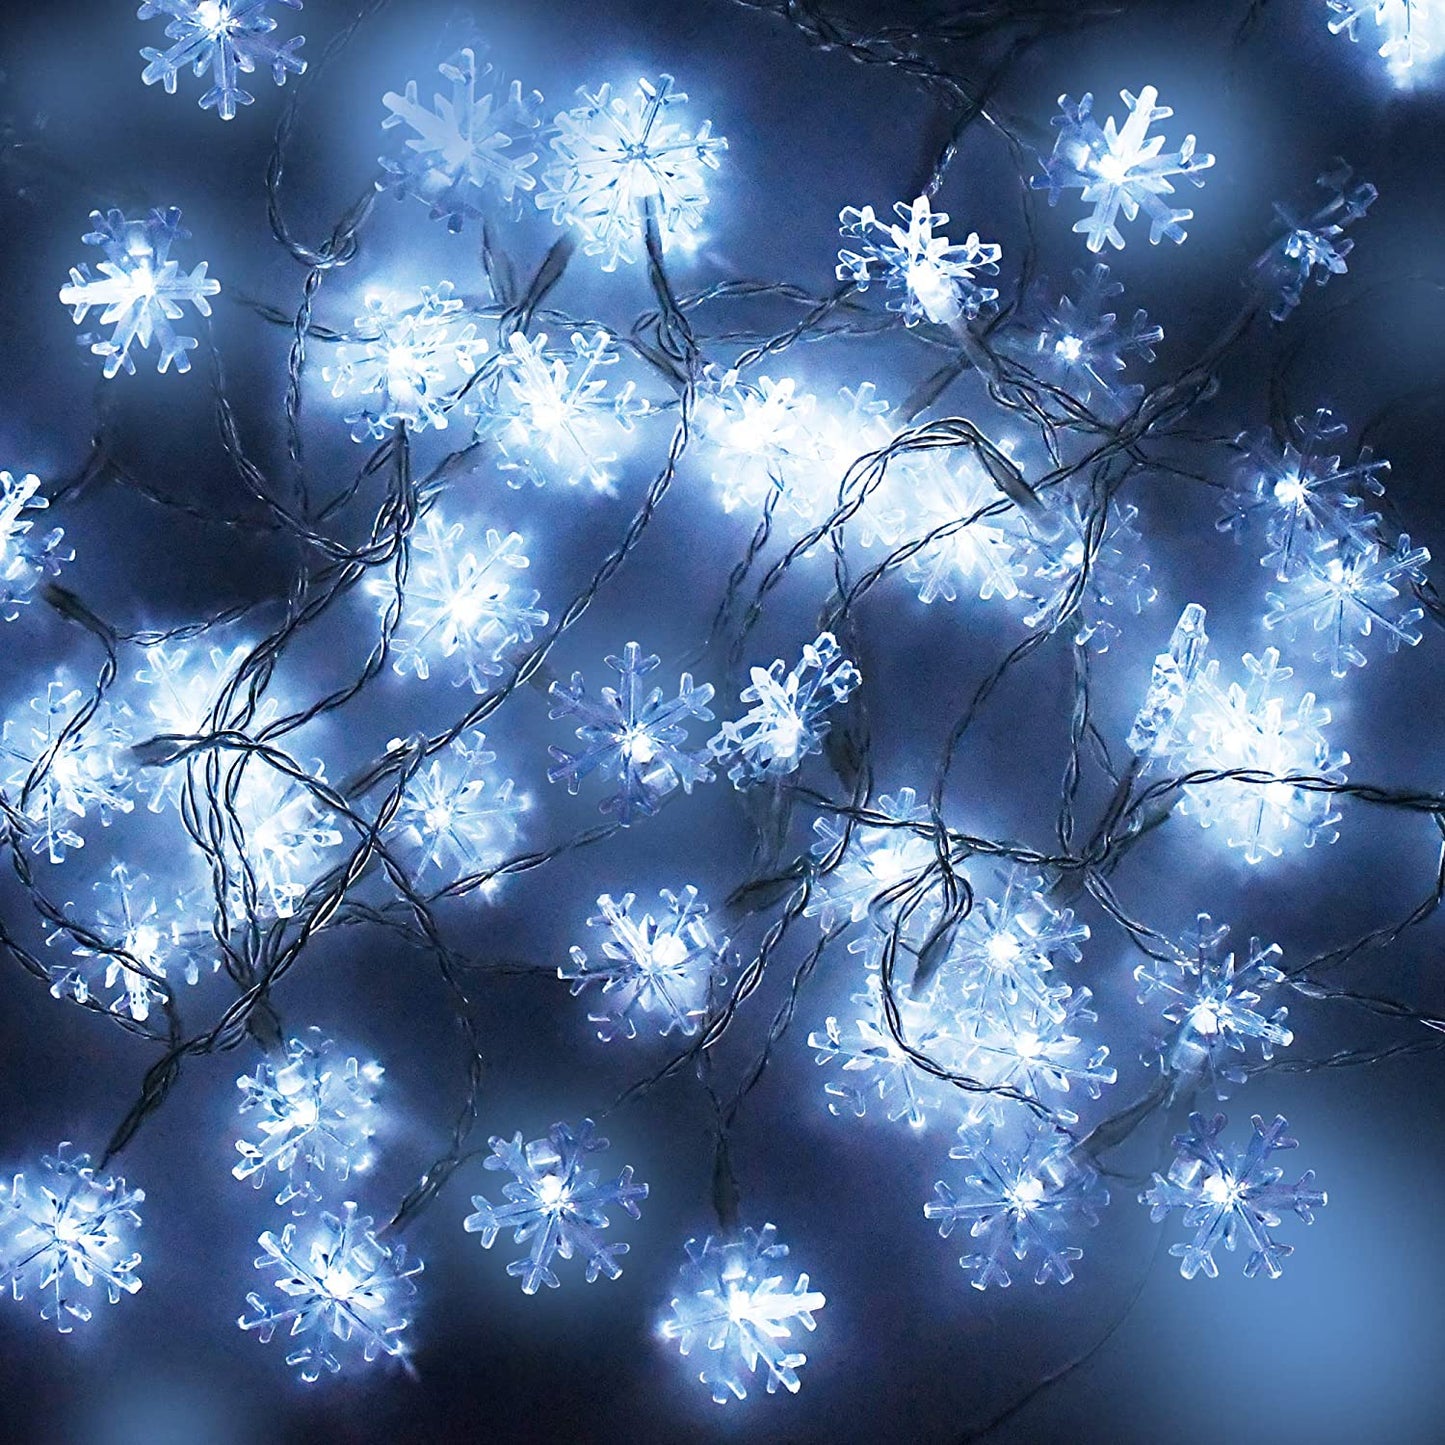 50-Count LED Cool White Snowflake String Lights